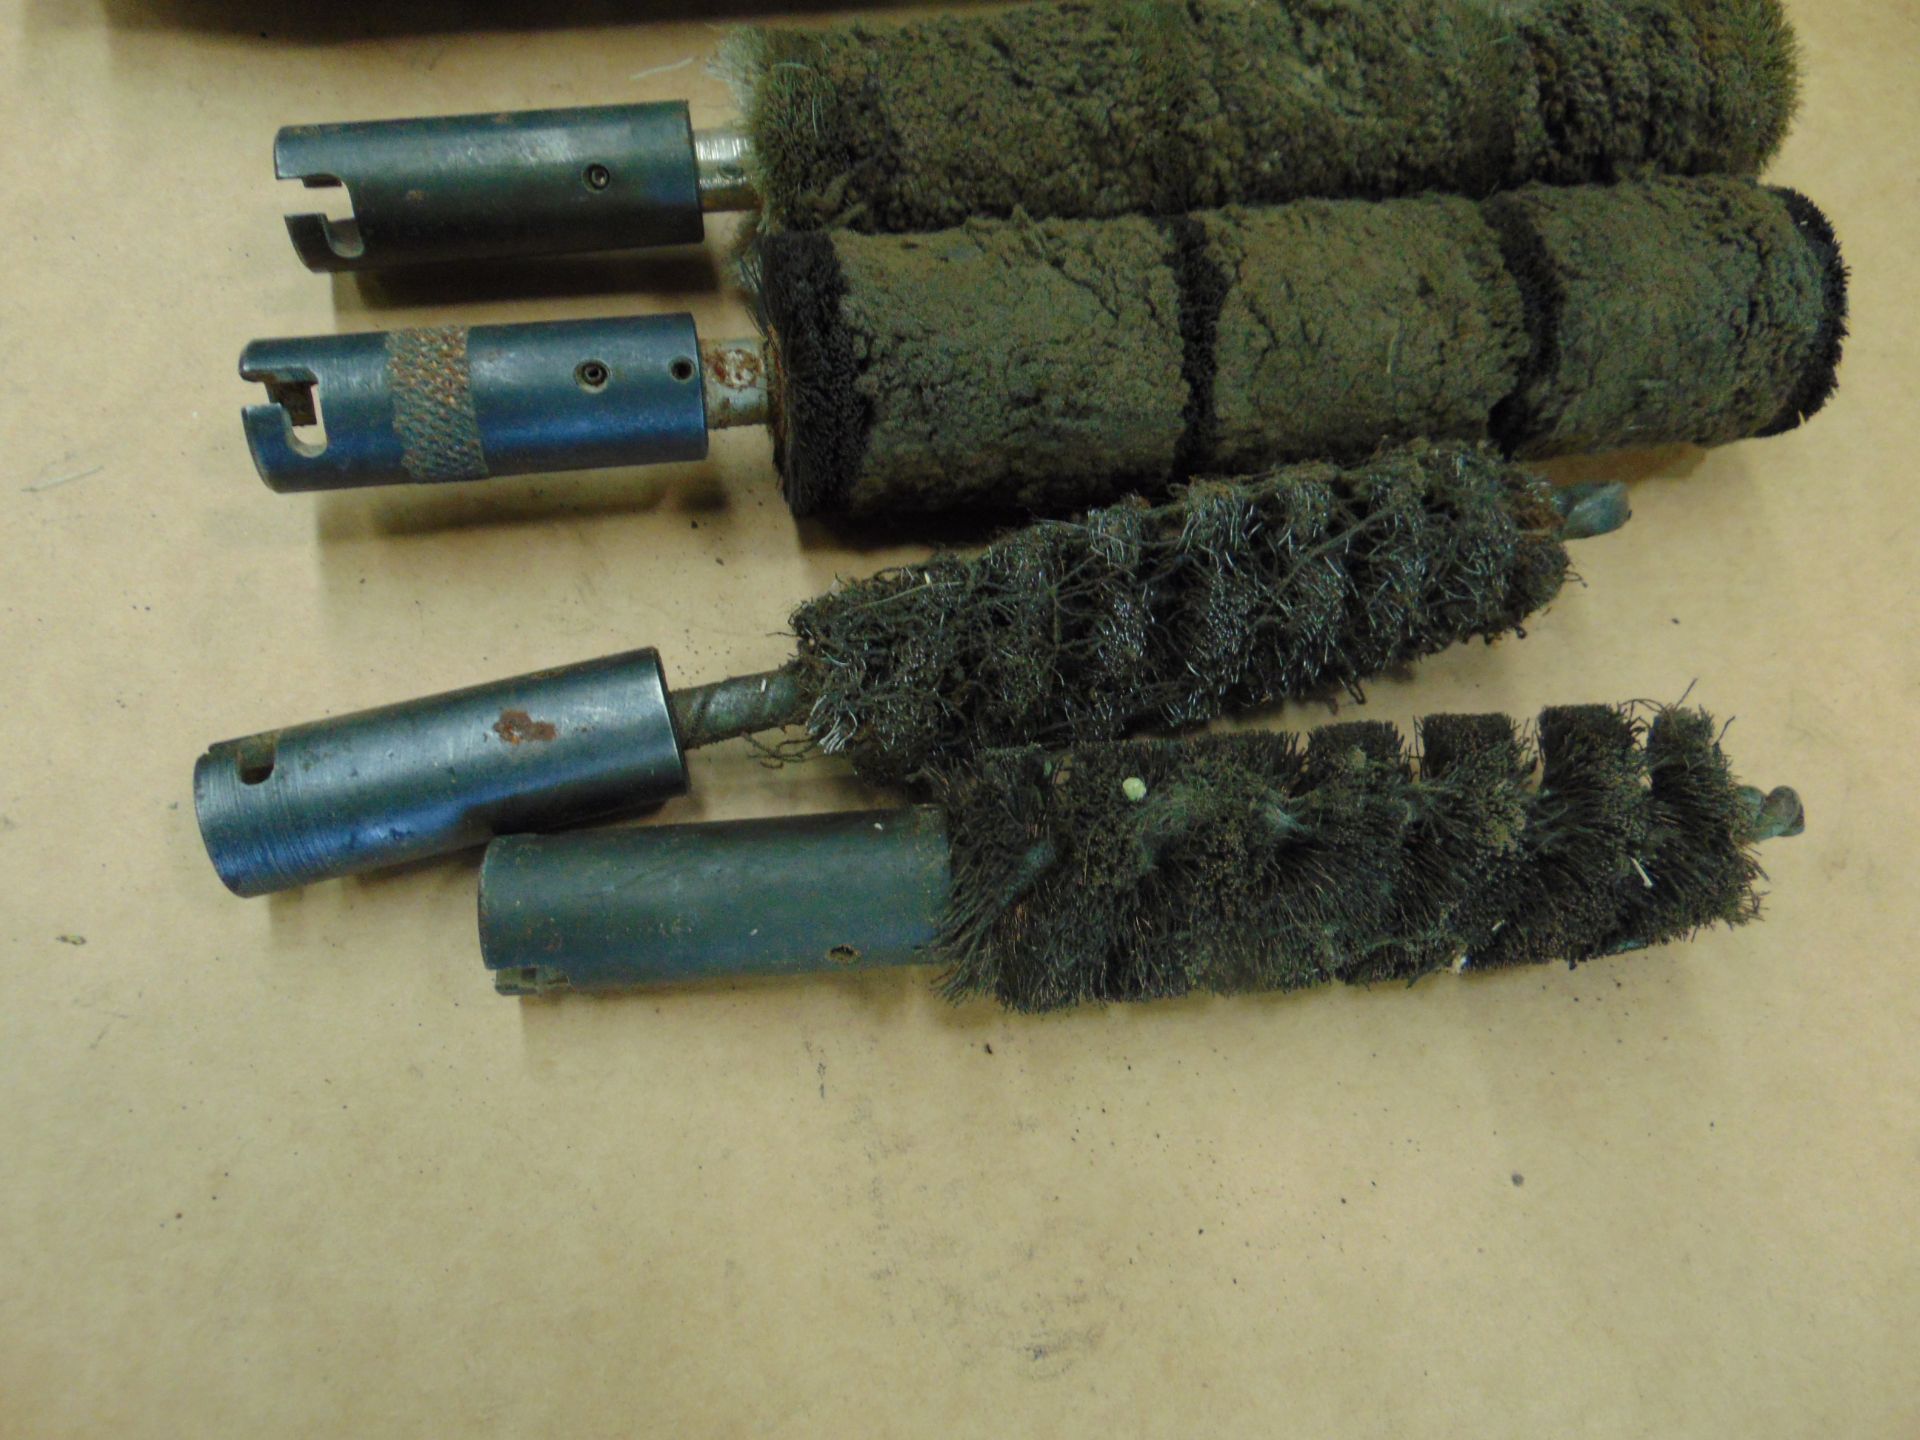 30mm RARDEN CANNON CLEANING KIT ITEMS - Image 3 of 3